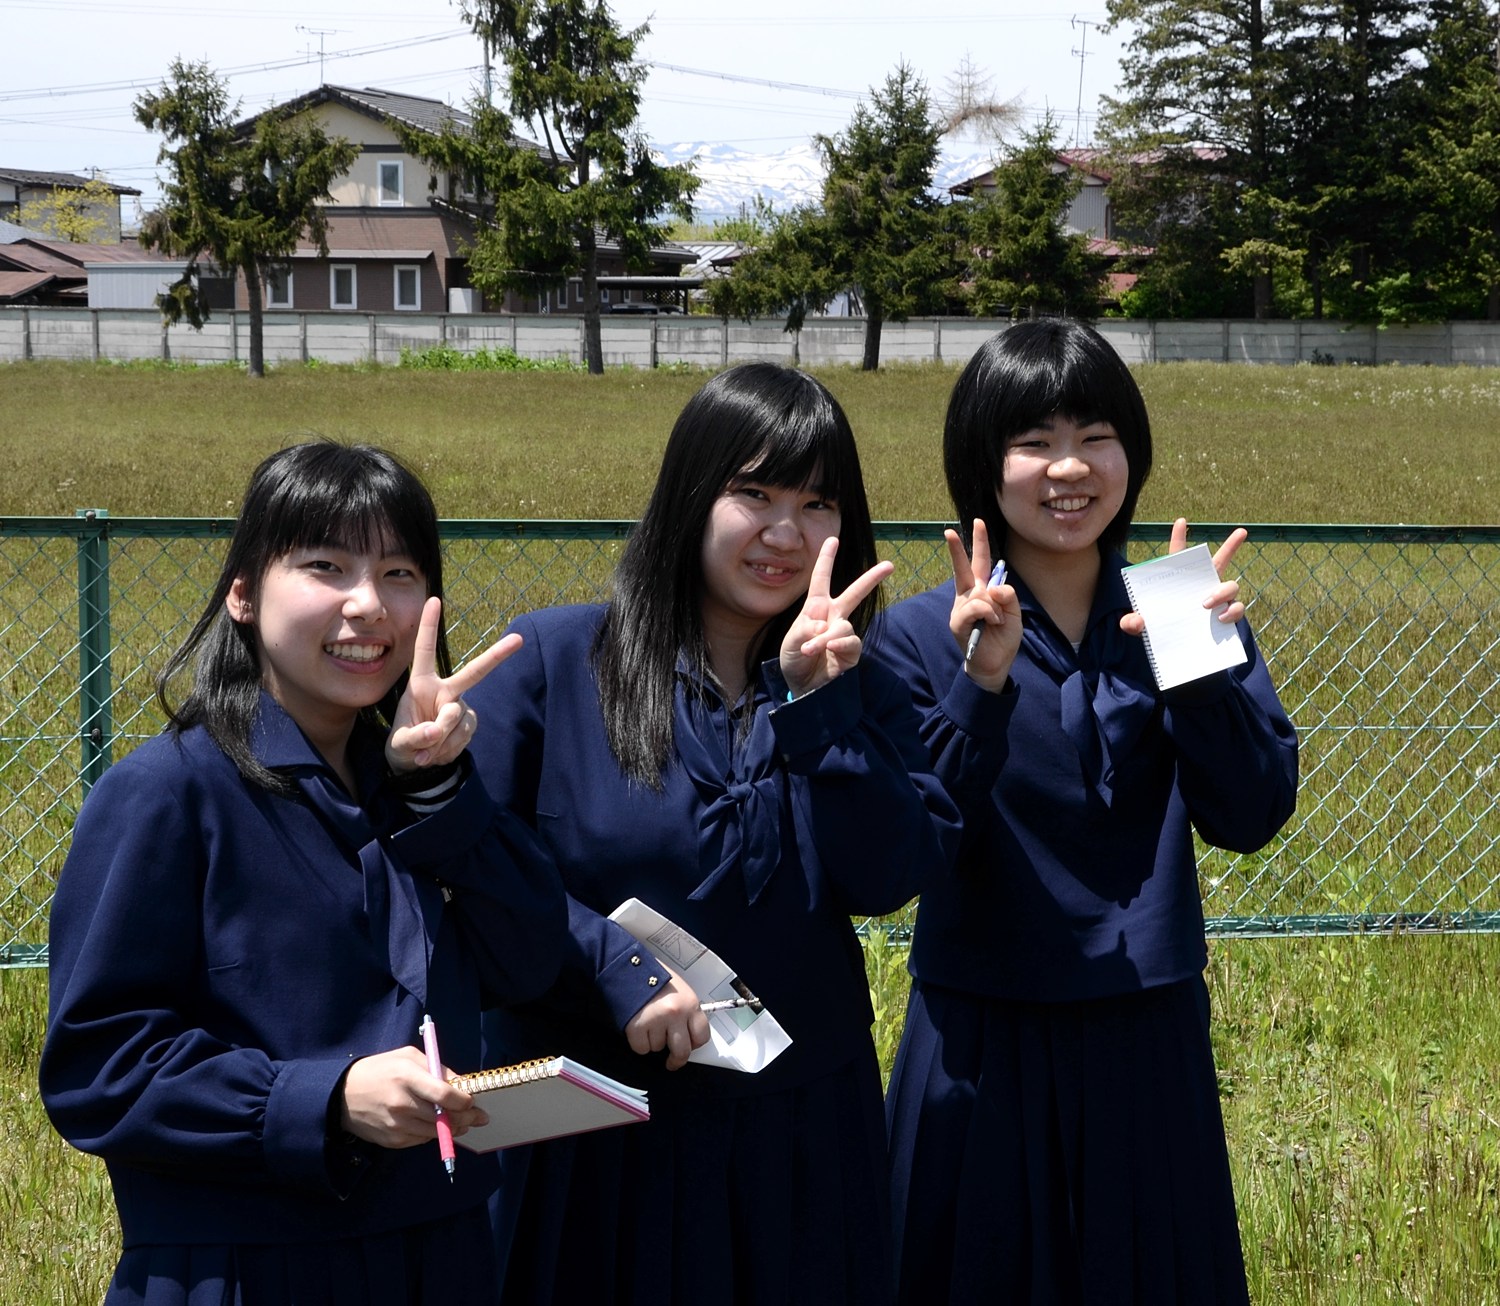 Students from Morioka 3rd High School at Mizusawa, happy to be taking part in PULSE@Parkes.